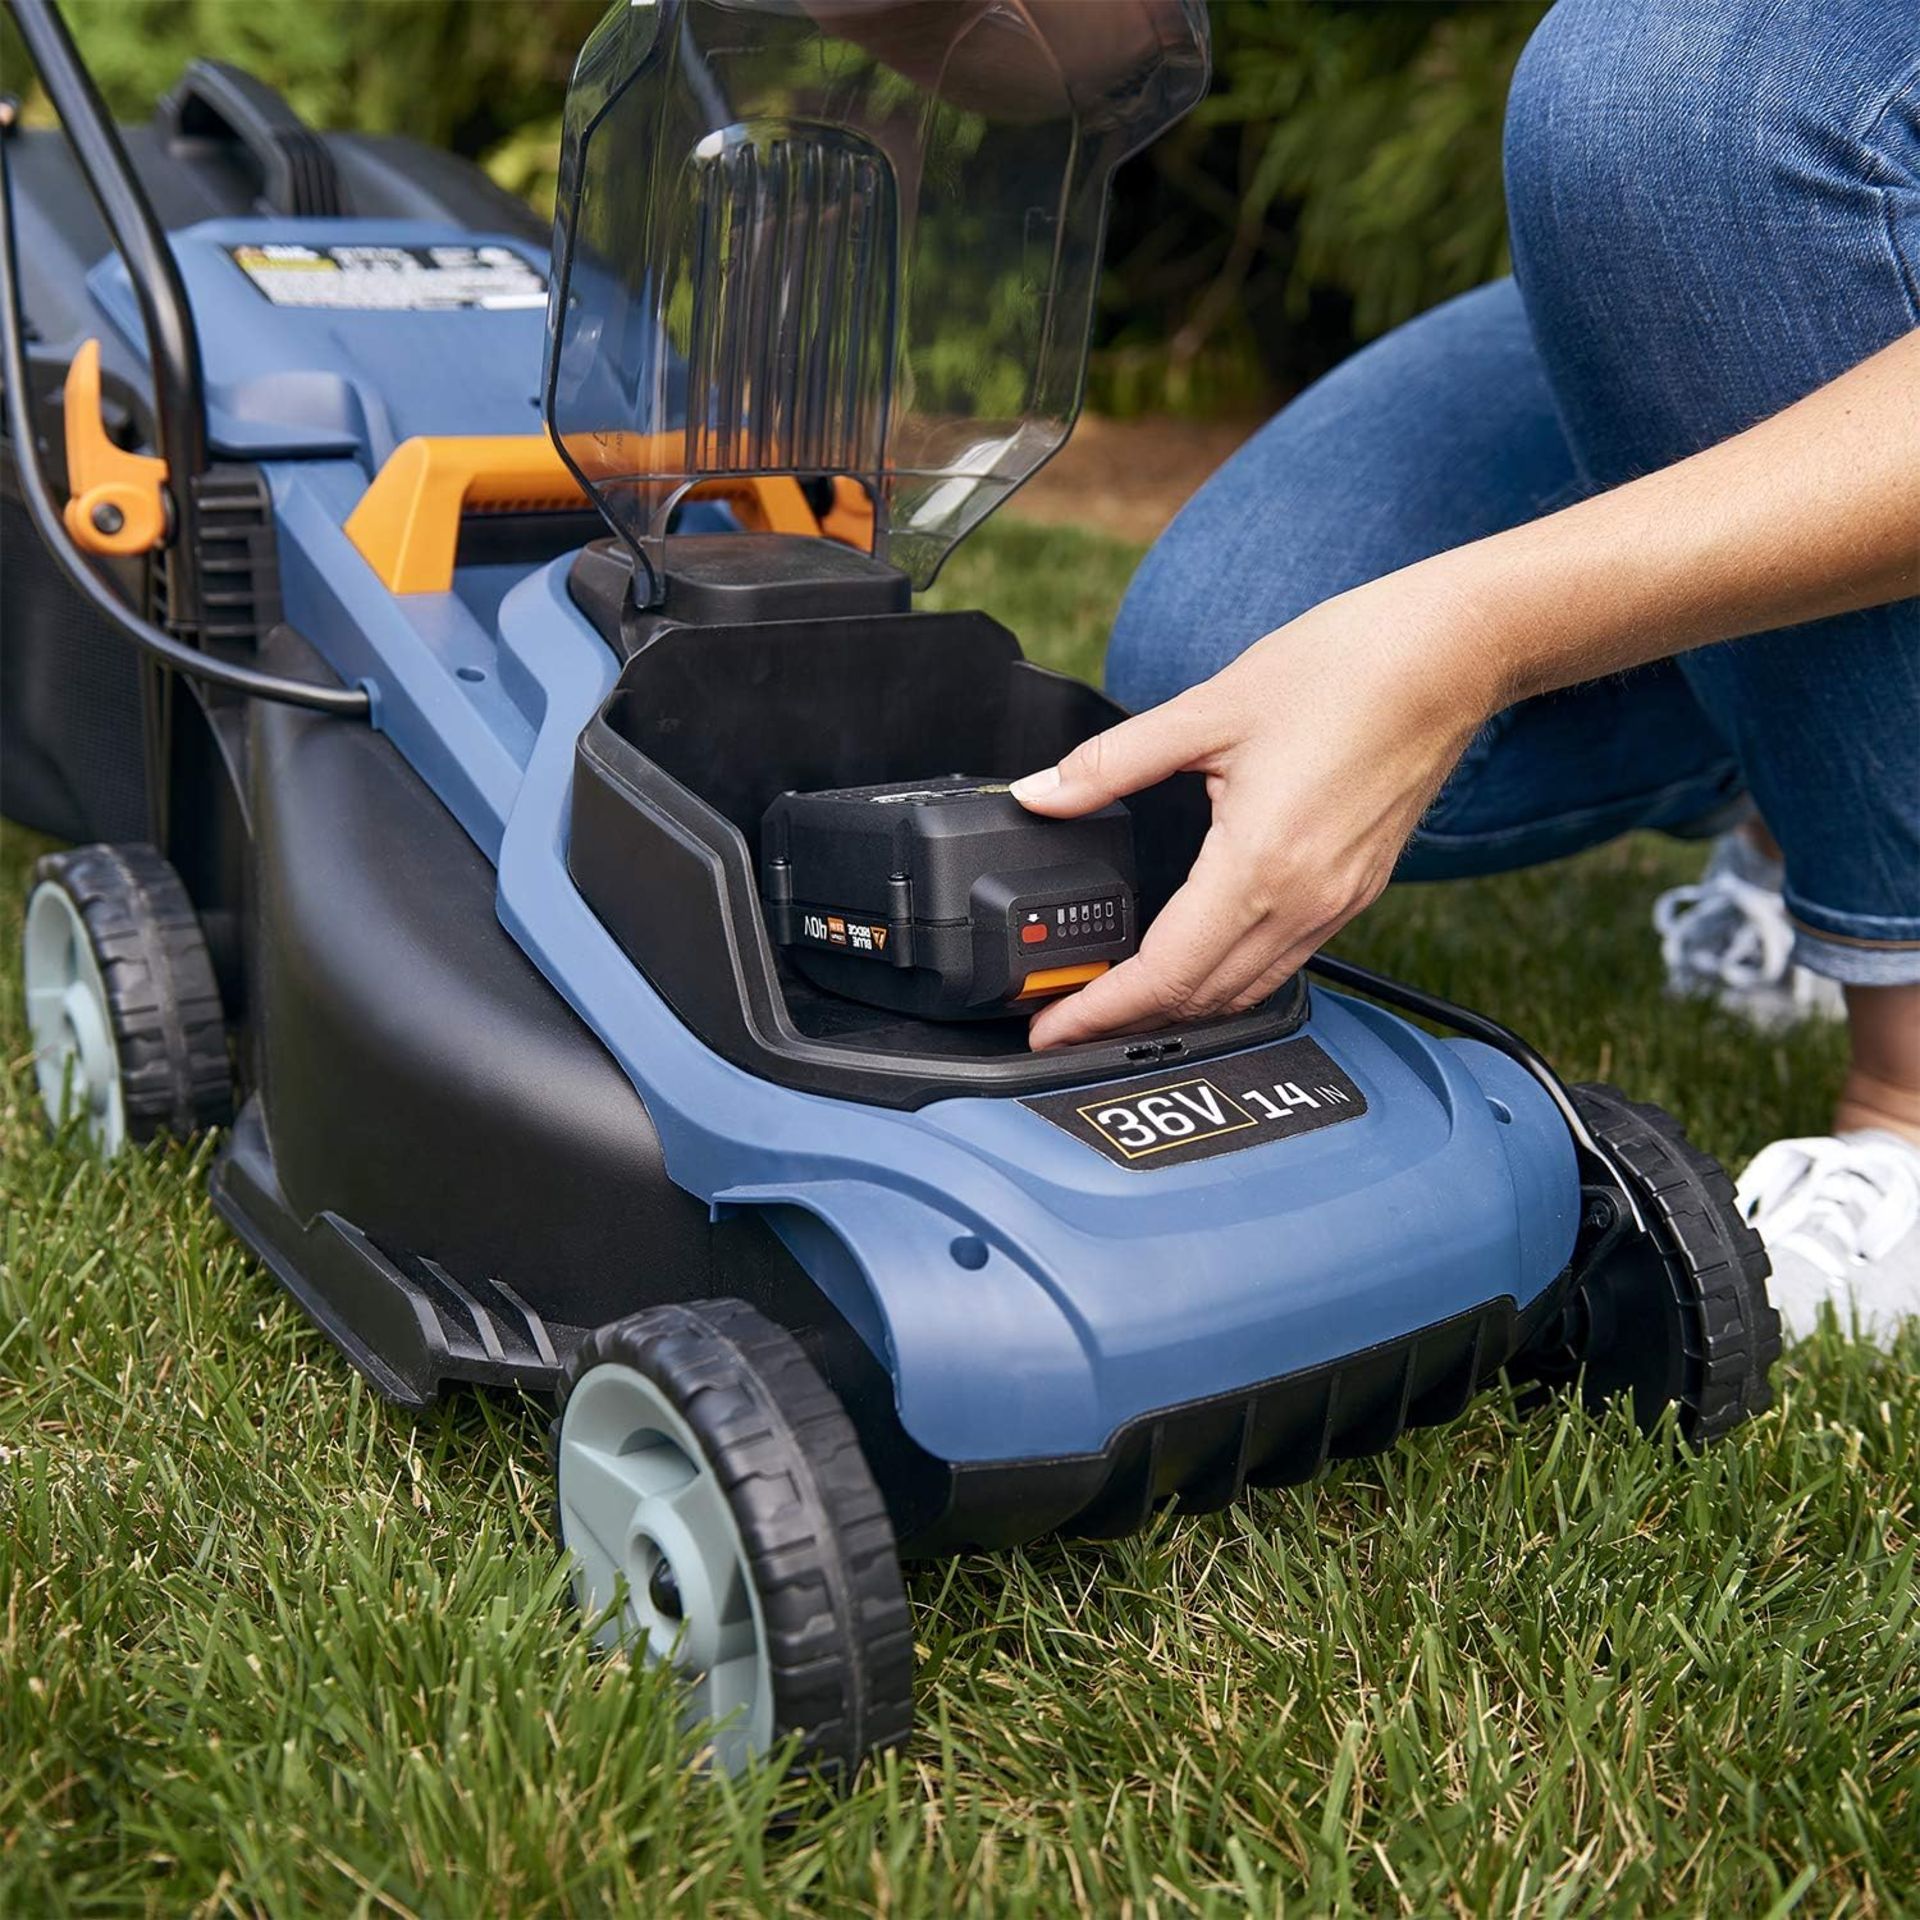 2x NEW & BOXED BLUE RIDGE 36V Cordless Lawnmower with 2.0 Ah Li-ion Battery. RRP £185 EACH. Powerful - Image 3 of 4